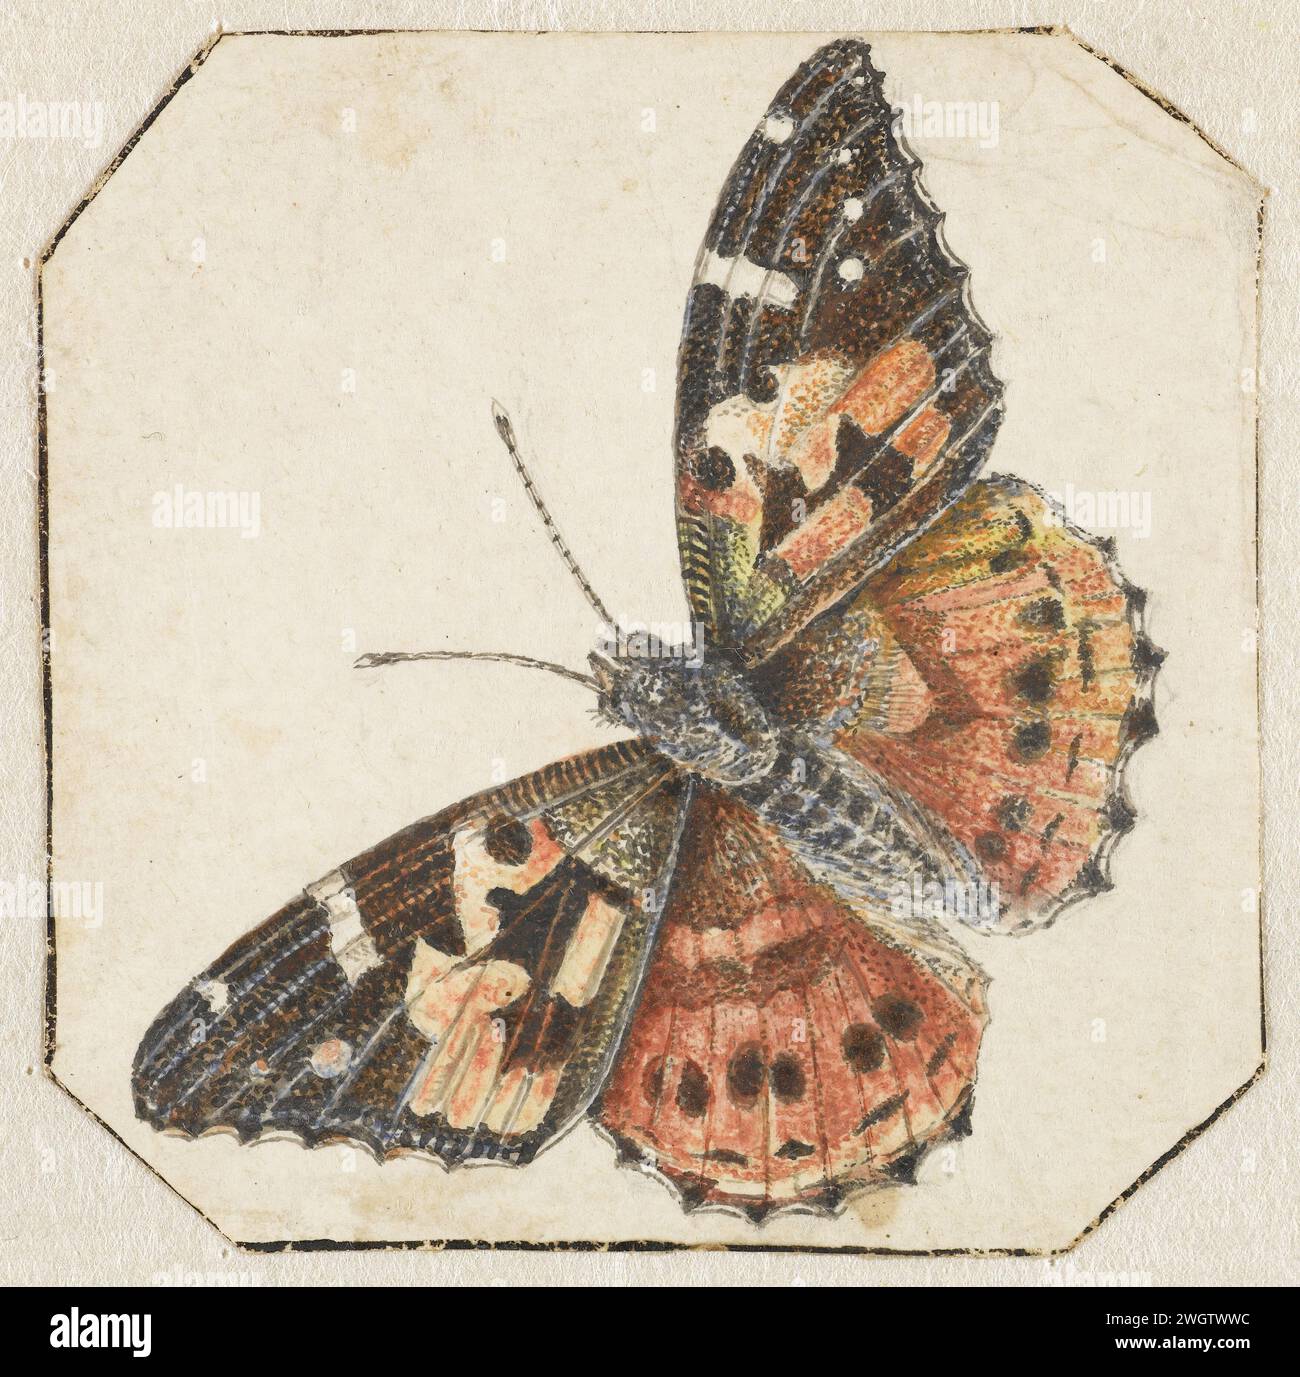 Distelvlinder (Vanessa Cardui), Pieter Barbiers (Possible), 1700 - 1800 drawing   parchment (animal material). watercolor (paint). ink pen / brush insects: butterfly Stock Photo